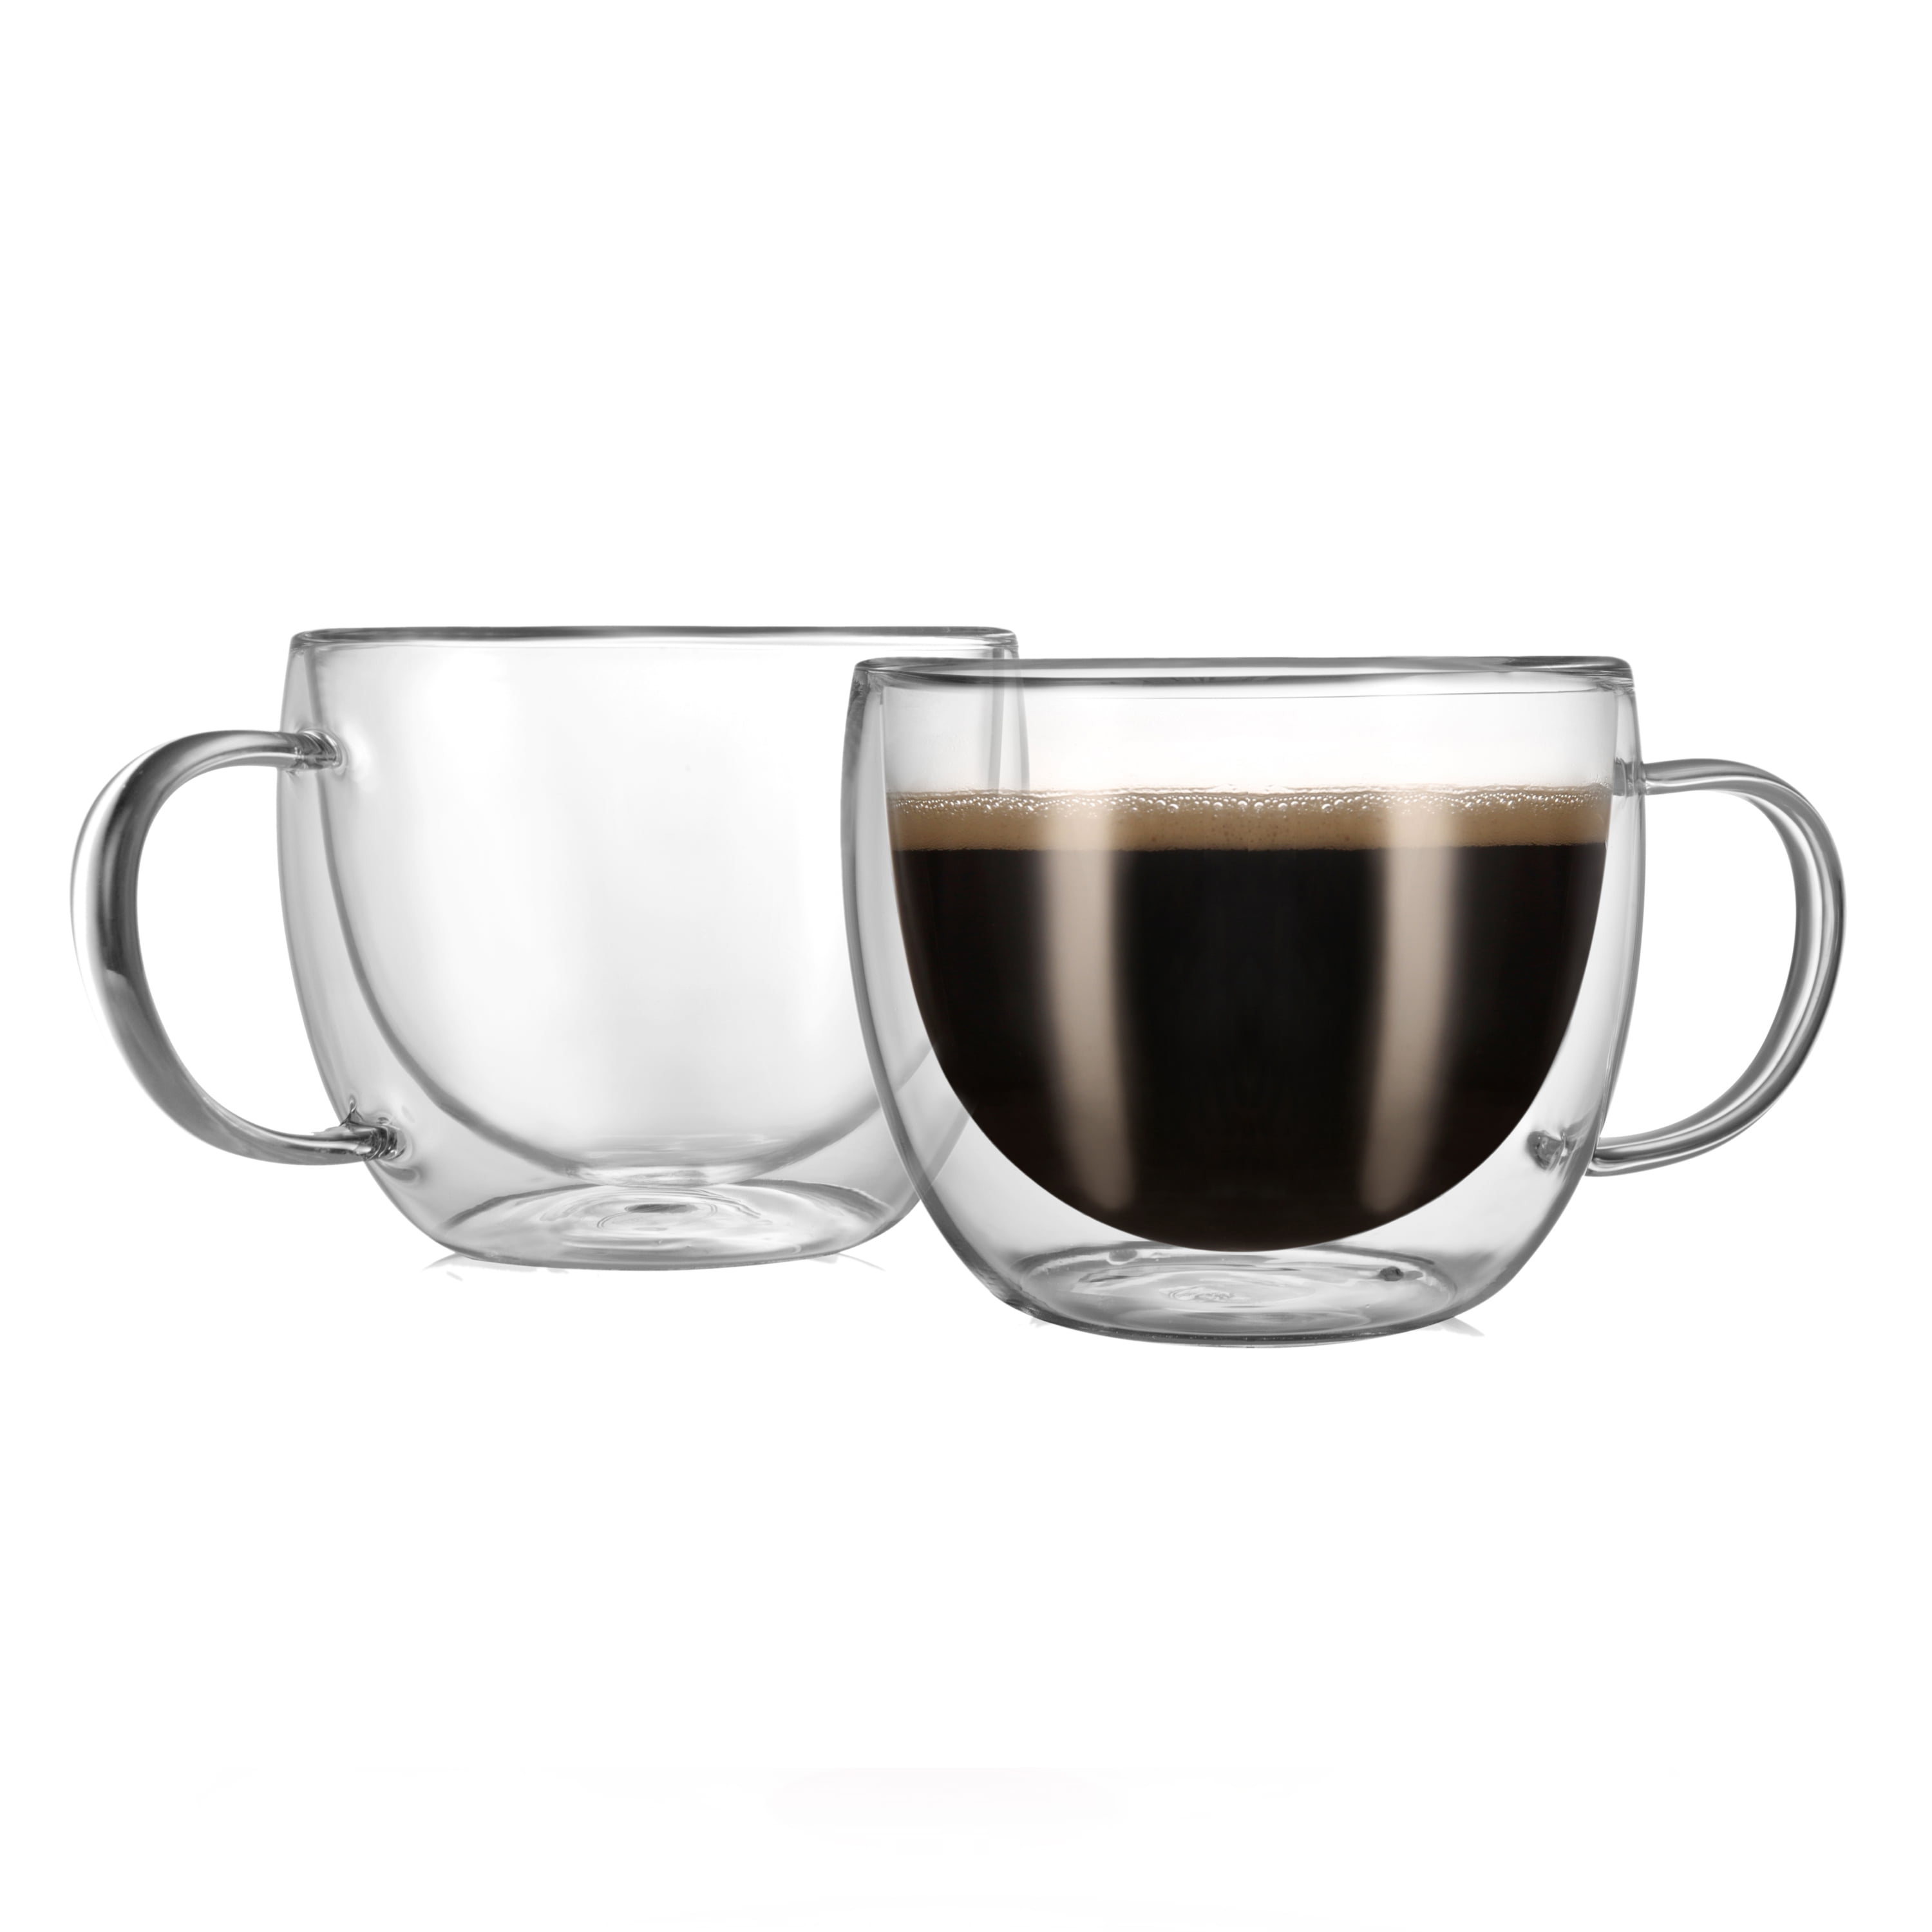 YMMIND 4-Pack 4oz Espresso Cups Espresso Shot Glasses with Handle, Small Glass Coffee Cups, Espresso Mugs Demitasse Cups Cappuccino Cup for Hot or